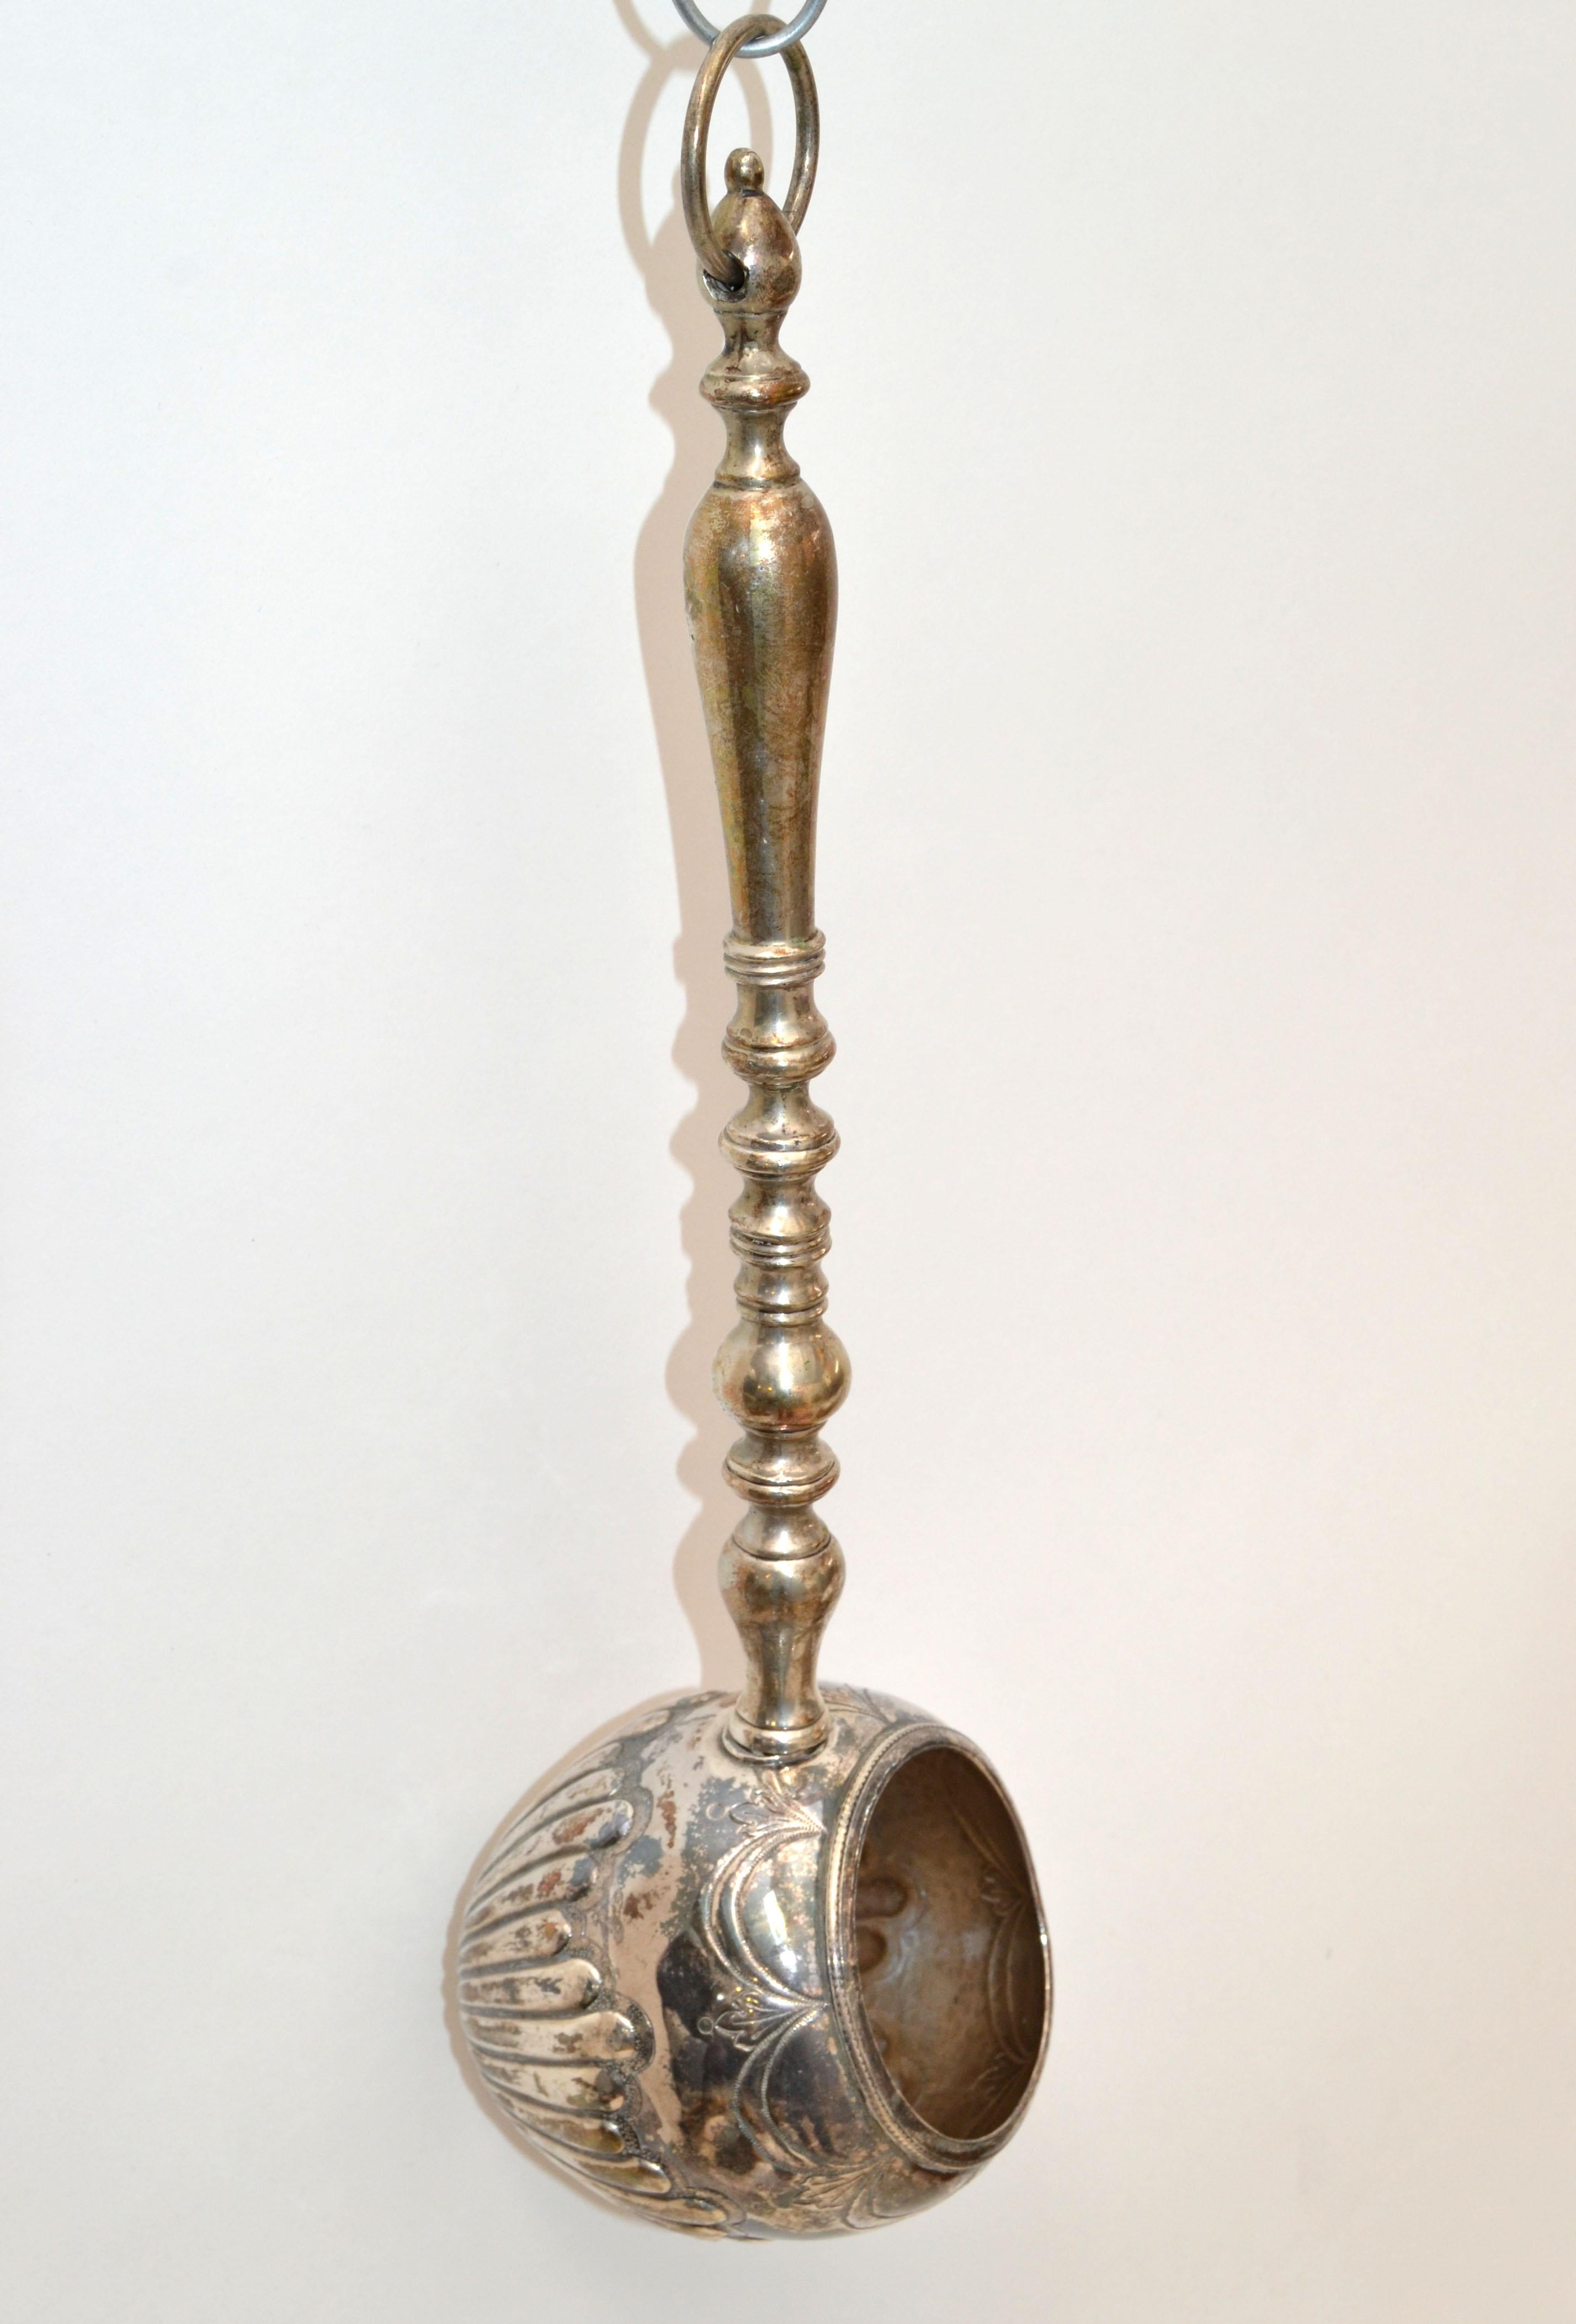 English Silver Plate Trademark Ornate Large Ladle Serving Piece for Punch Bowl For Sale 7